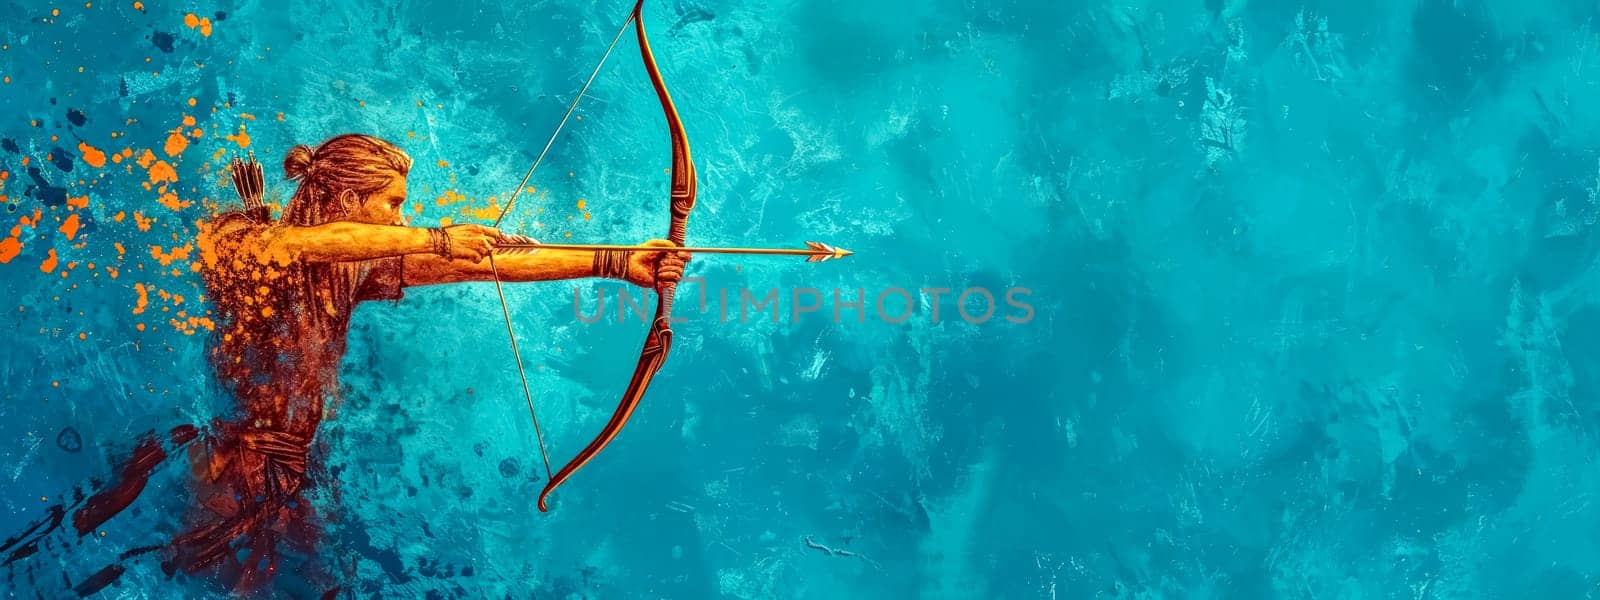 dynamic depiction of an archer in mid-action, with an abstract, painterly background in shades of turquoise and orange, evoking a sense of energy and focus by Edophoto